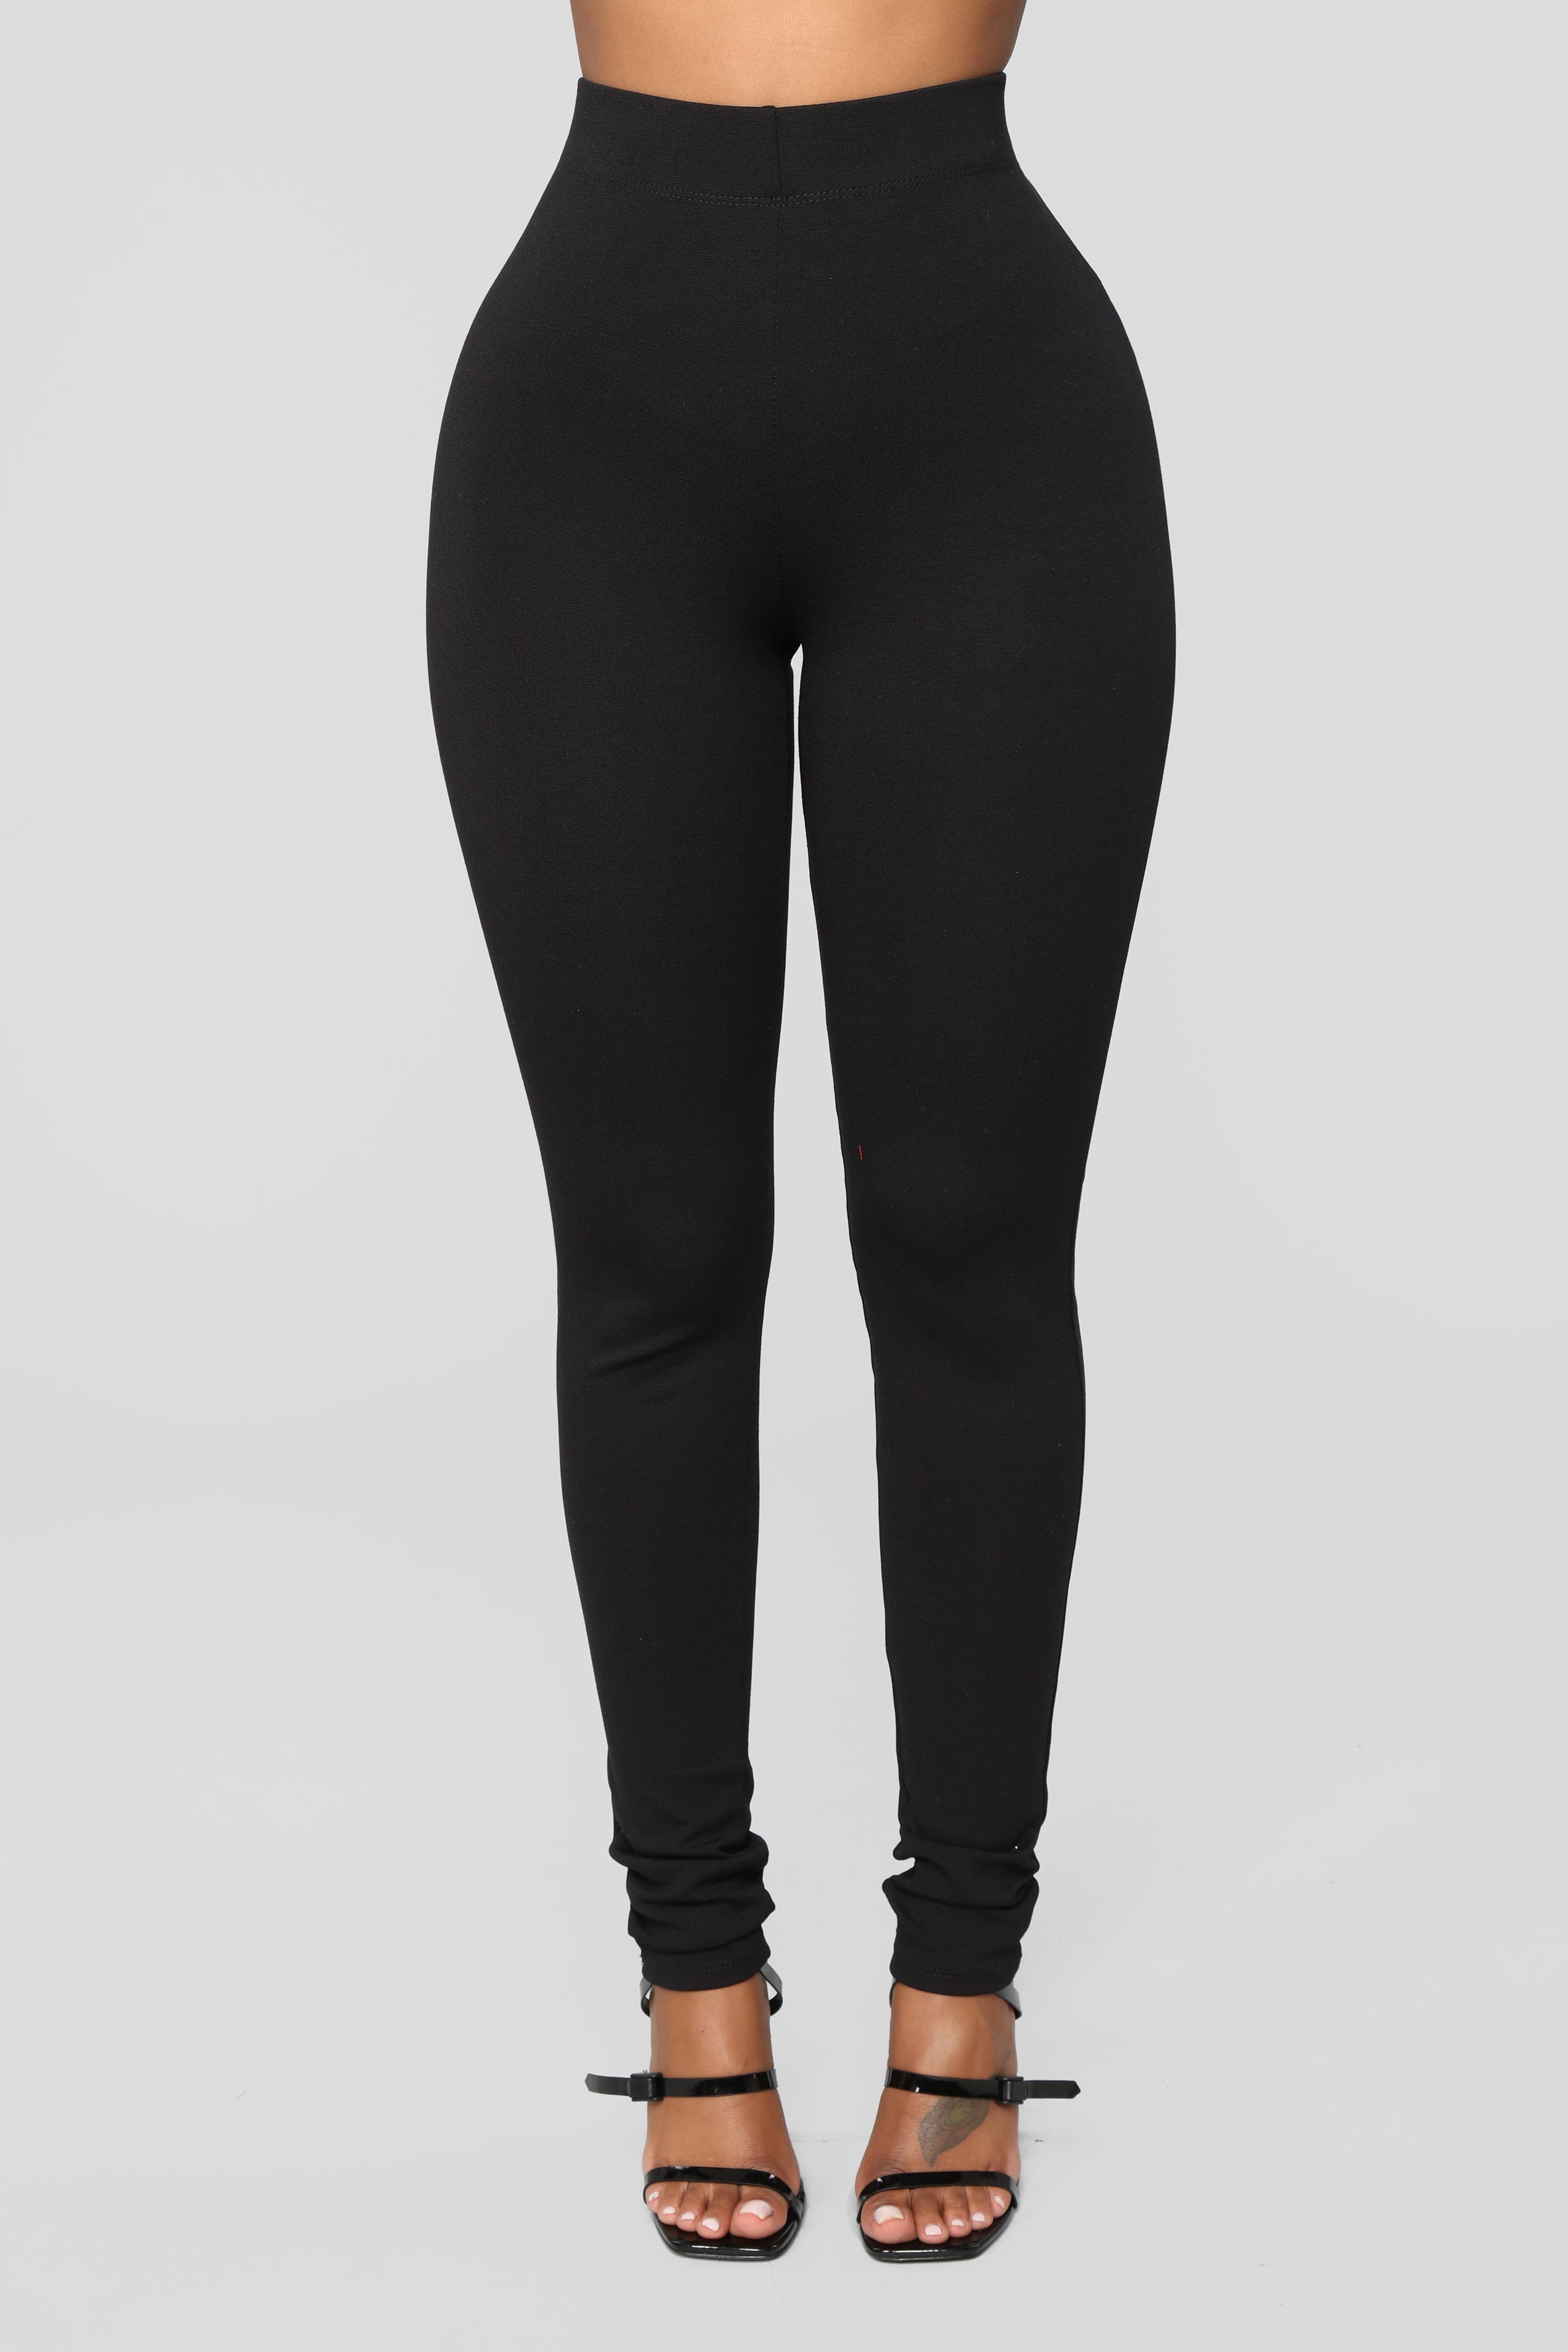 Women's High-Waisted Ponte Leggings - A New Day Black XS 1 ct